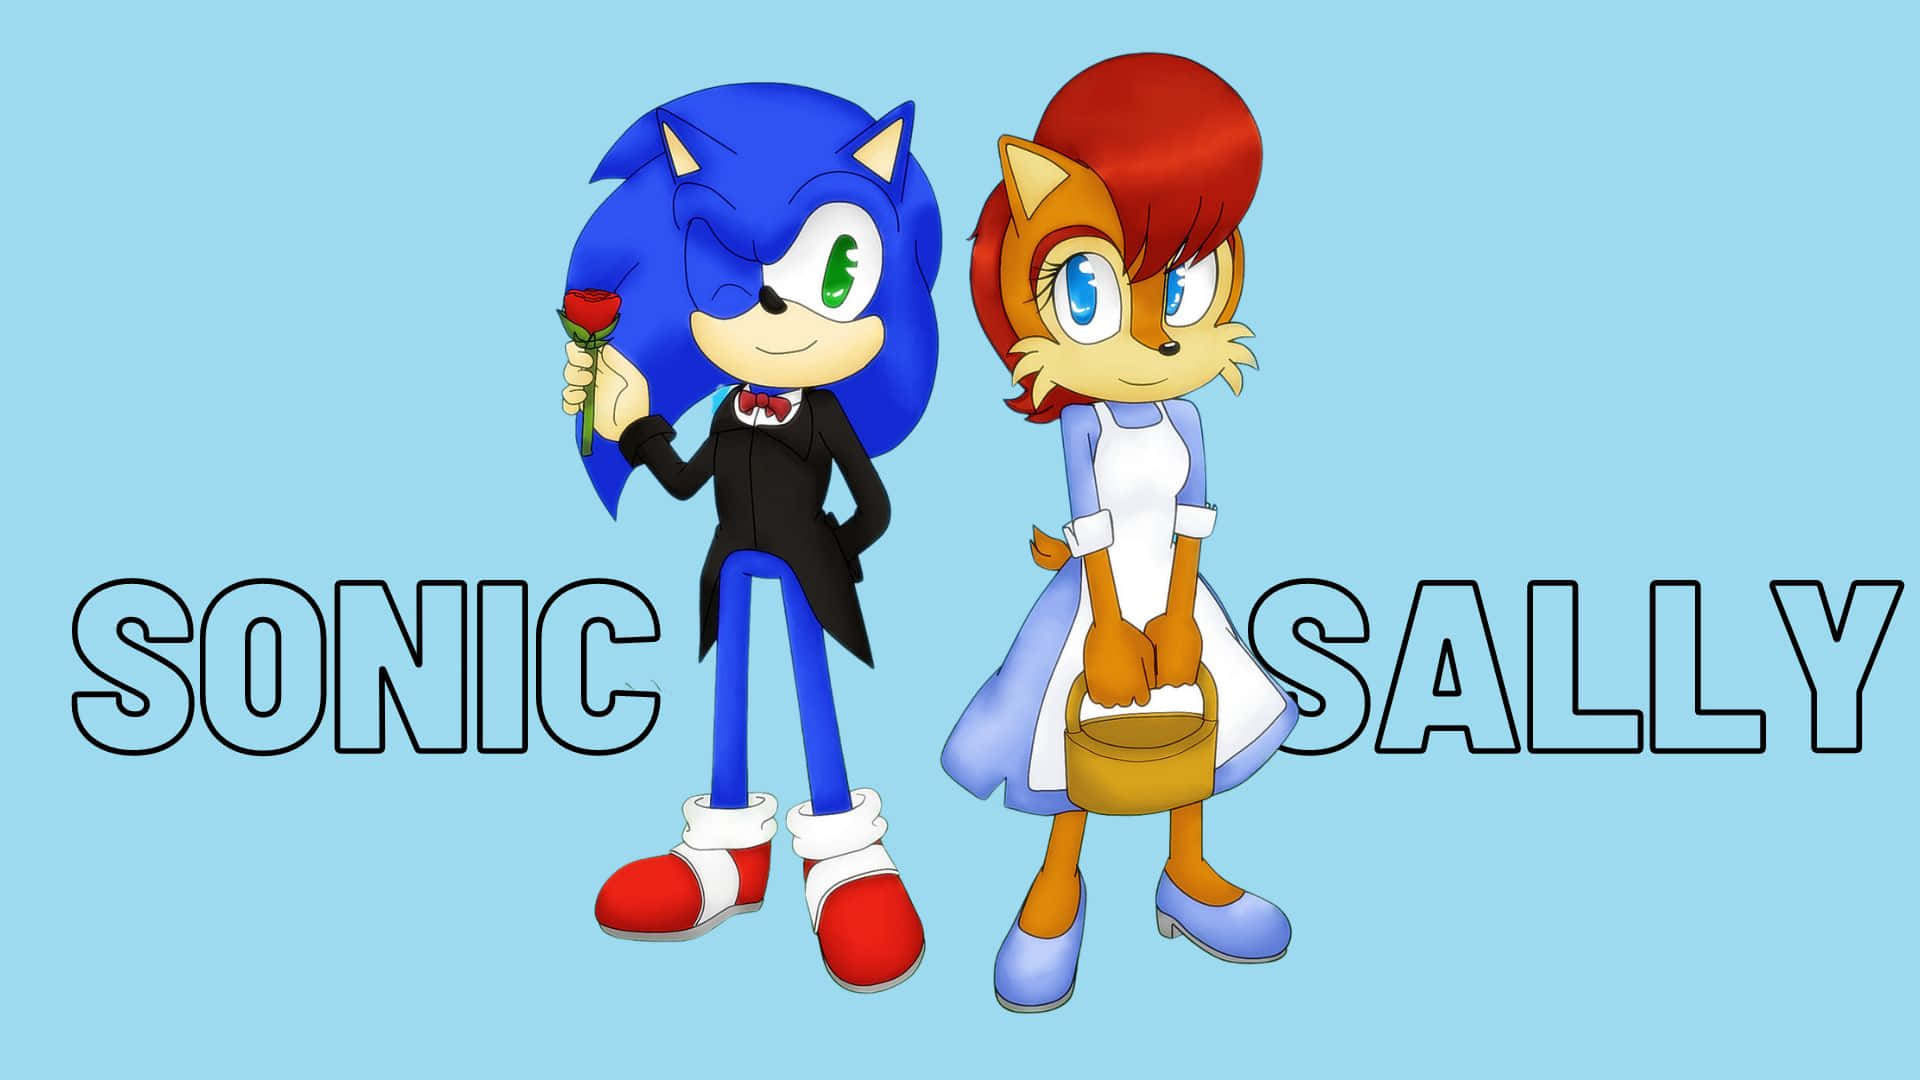 Sonic and Sally sharing an adventure together Wallpaper